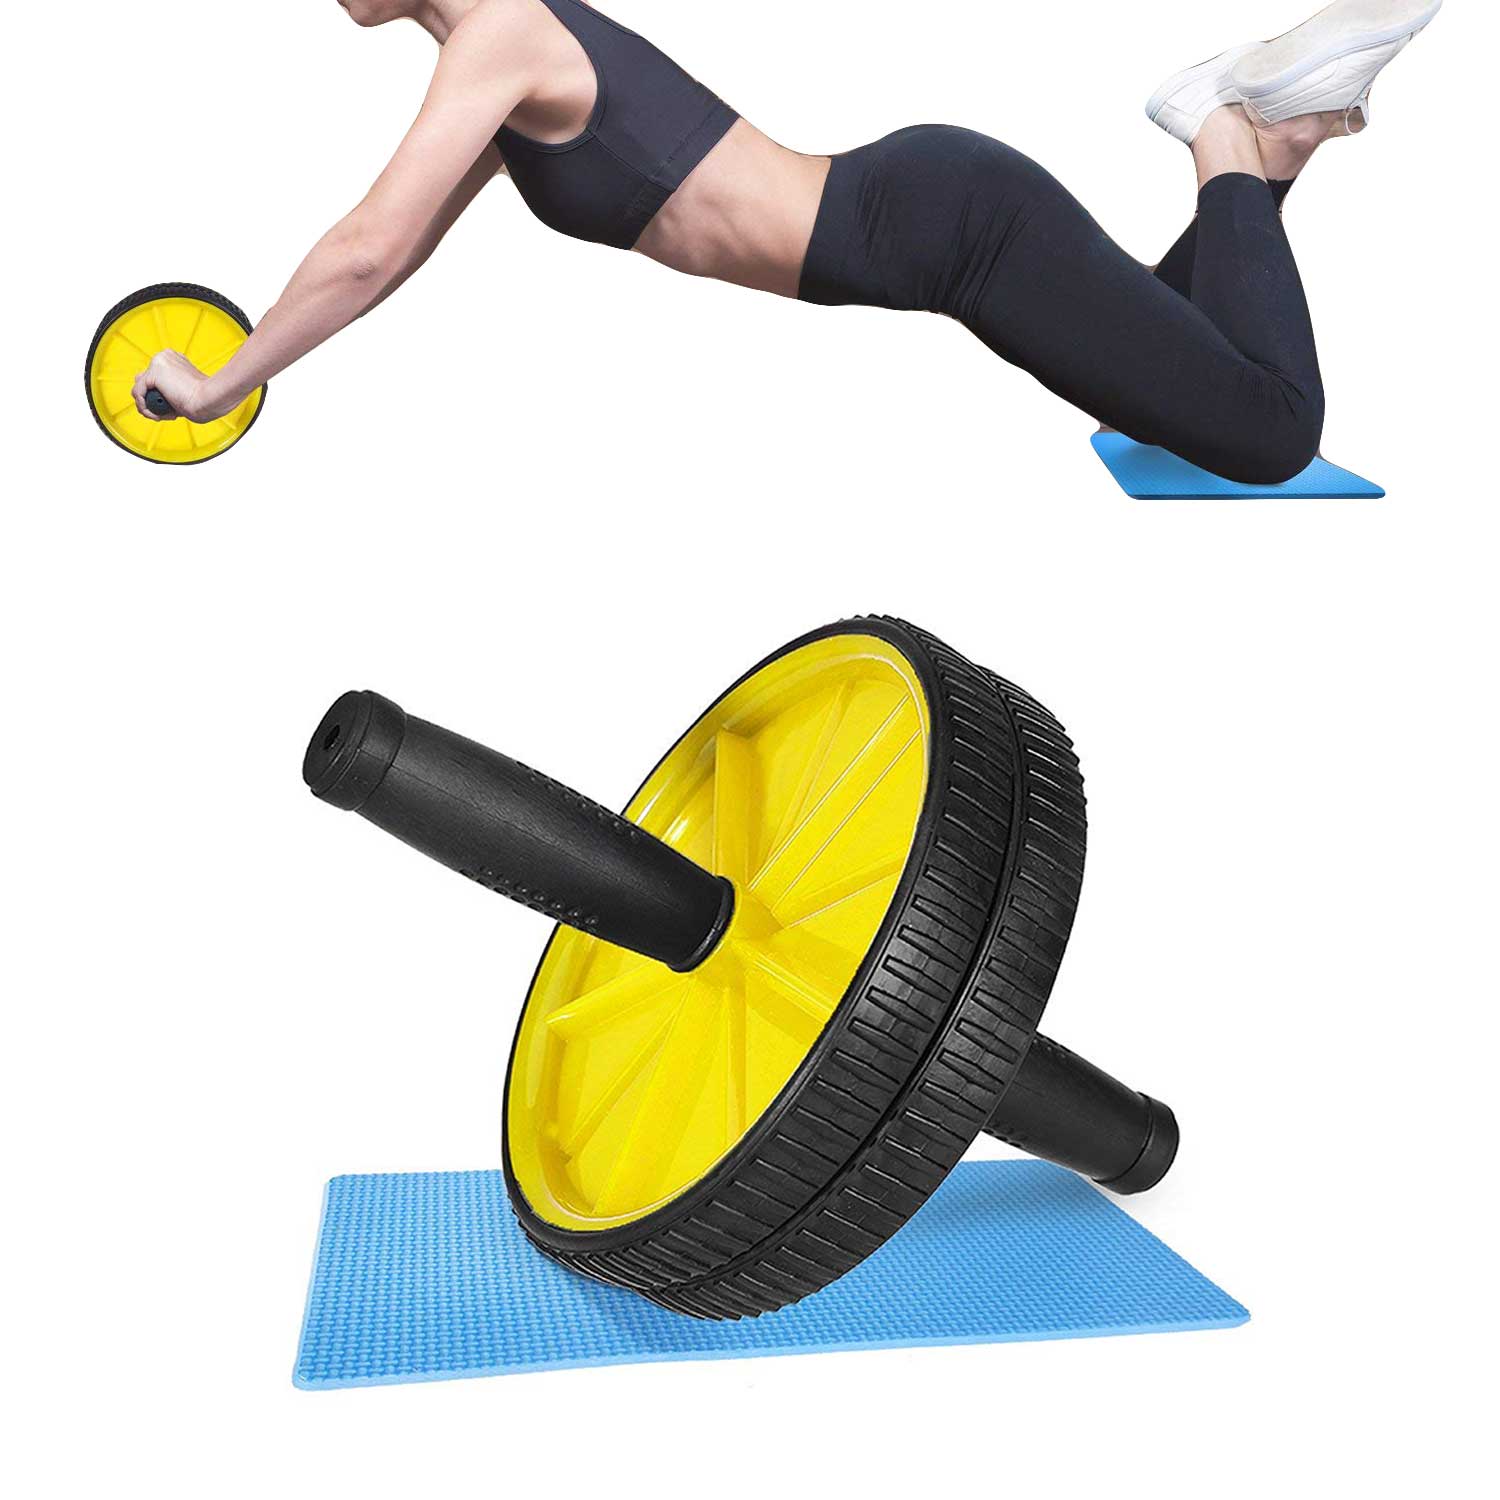 https://www.godamonline.com/storage/products/2021/November/28/Fitness-Ab-roller-Abdominal-Rubber-Handle-Double-Training-Abs-Wheels-Roller-Fitness-for-Body-Building-Home_1638084291.jpg